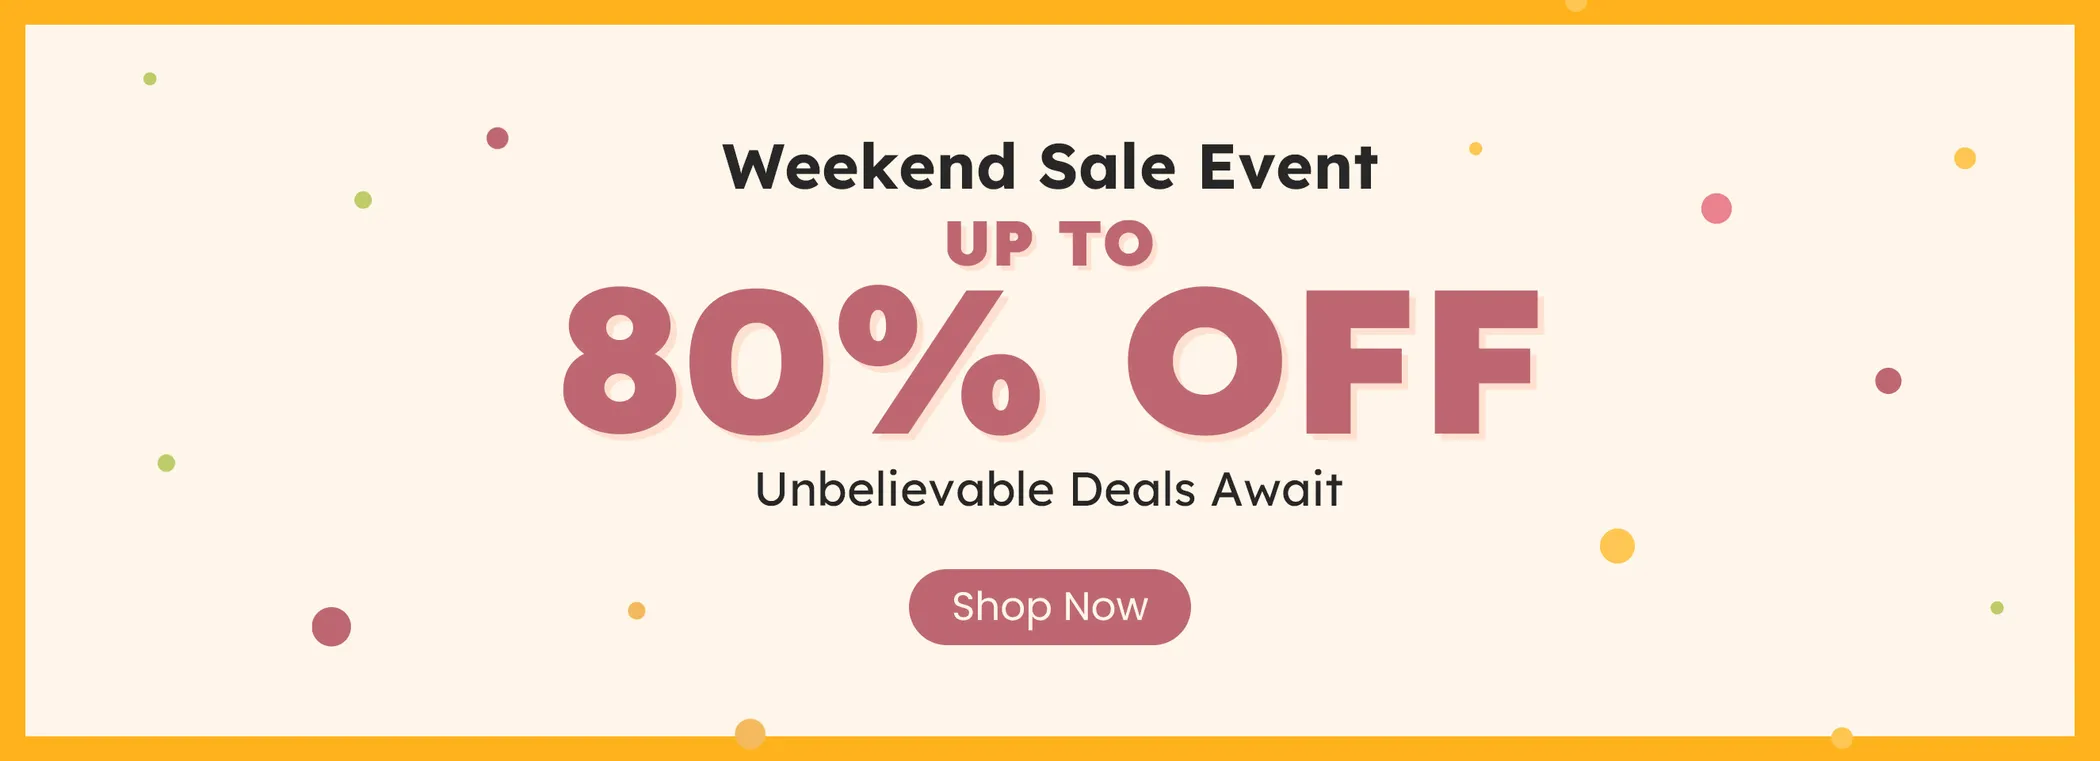 Click it to join Happy Weekend Sale activity